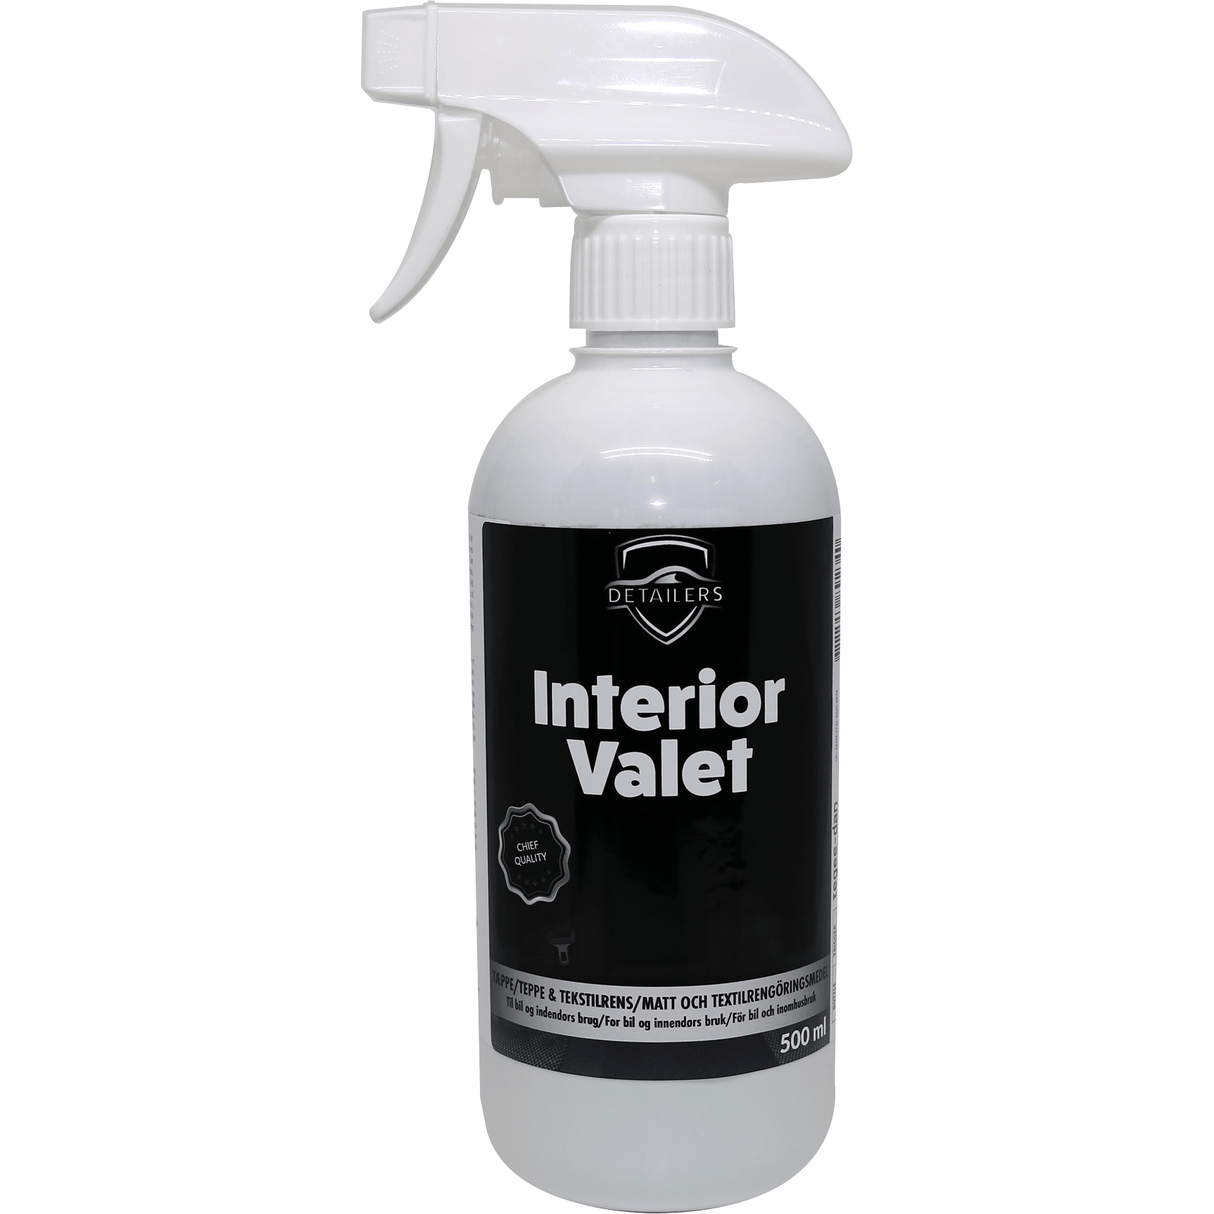 DETAILERS Interior Valet 500ml - Xpert Cleaning